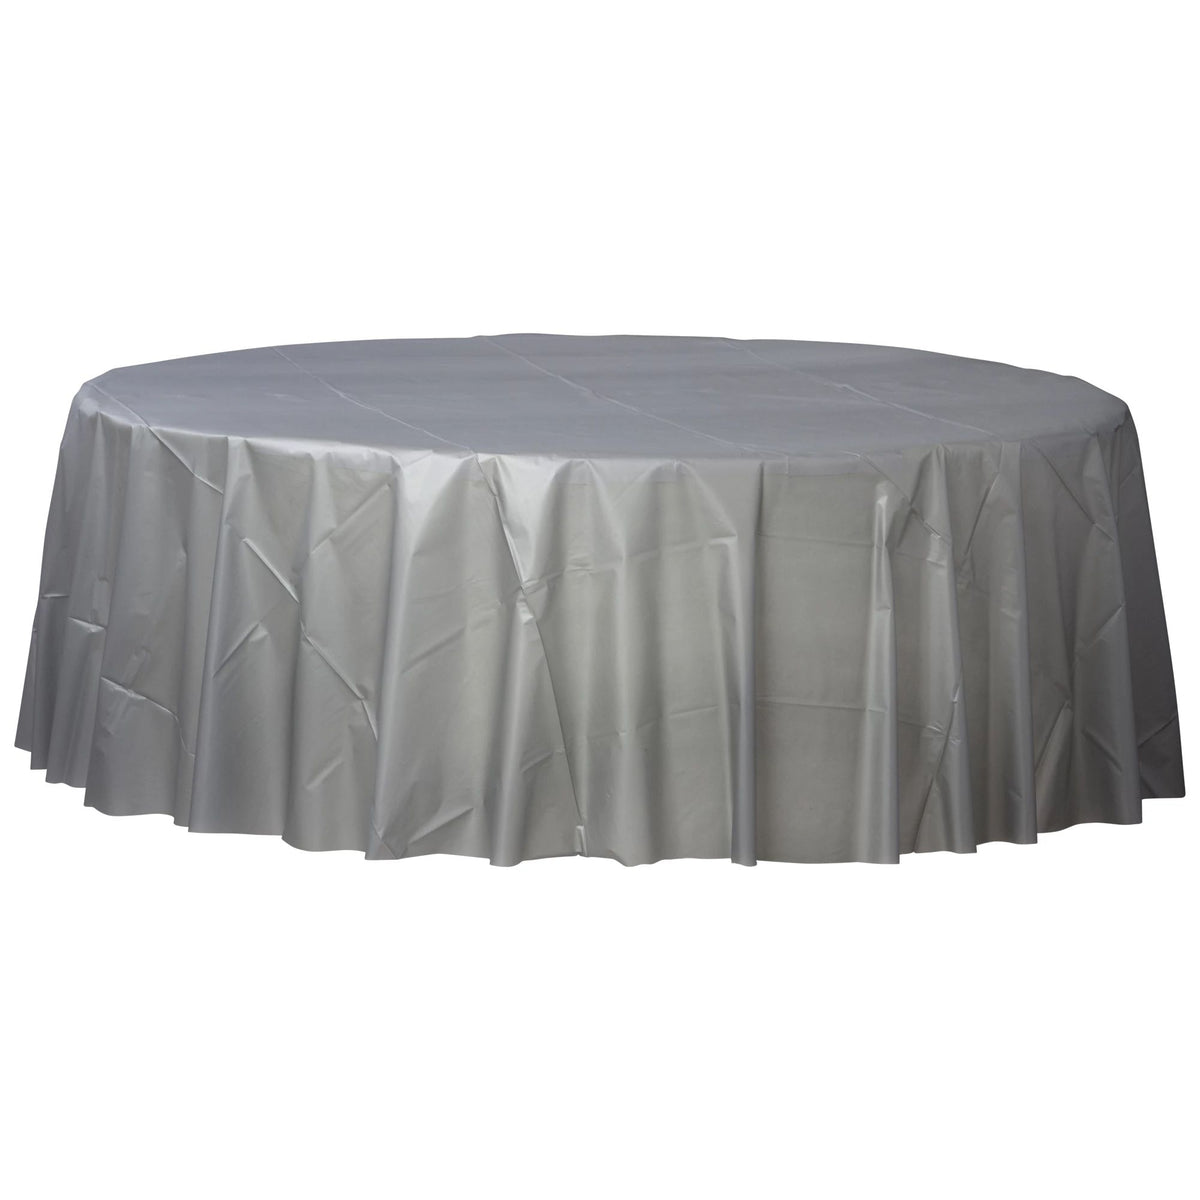 Silver 84" Round Plastic Table Cover